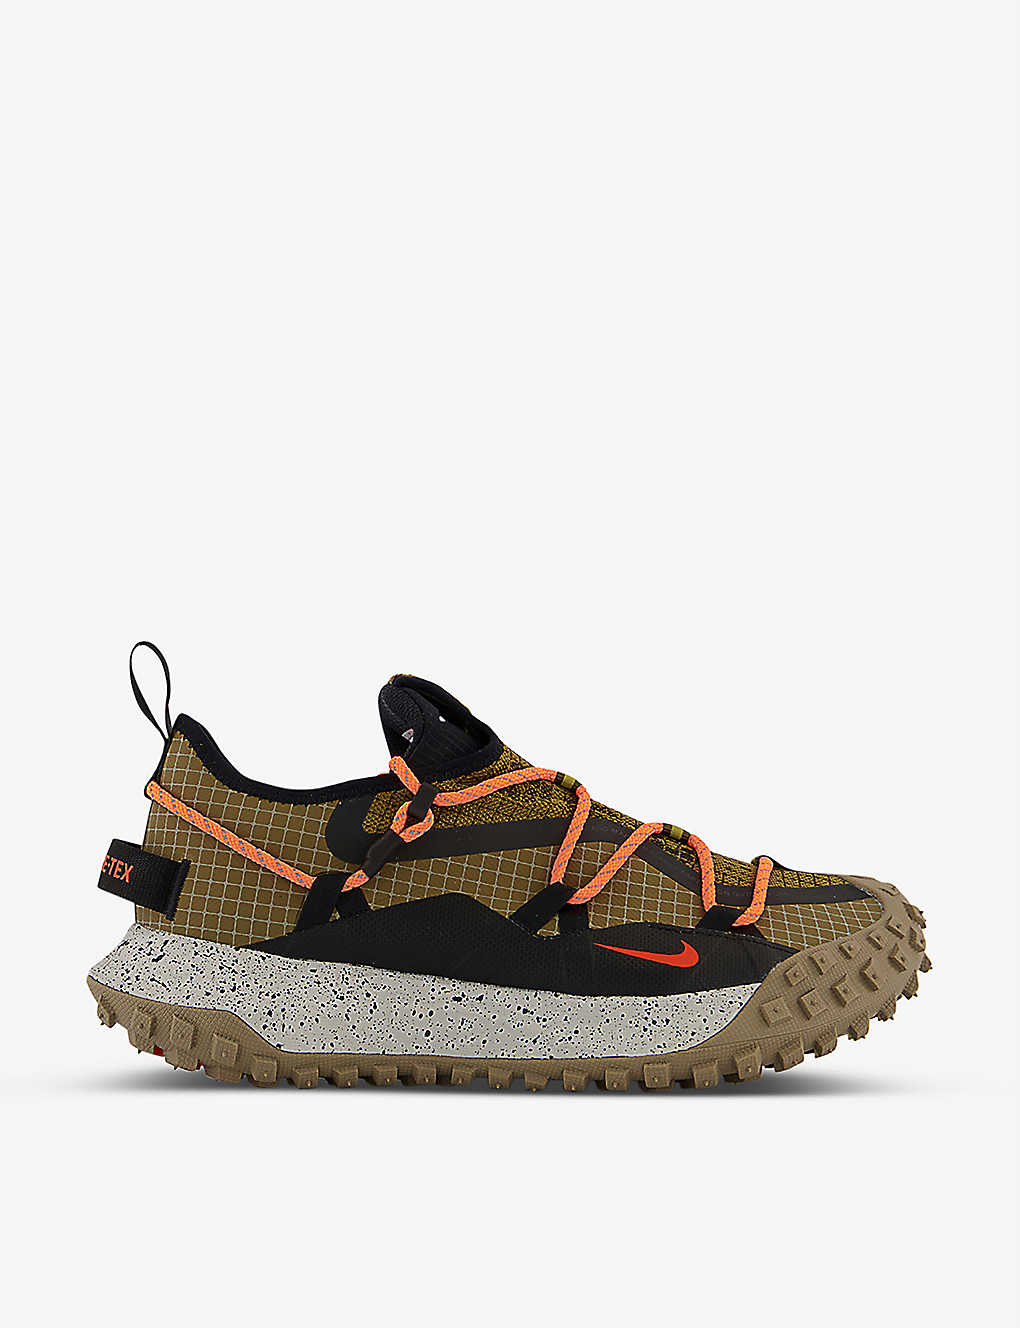 NIKE ACG MOUNTAIN FLY LOW MESH TRAINERS,54844927